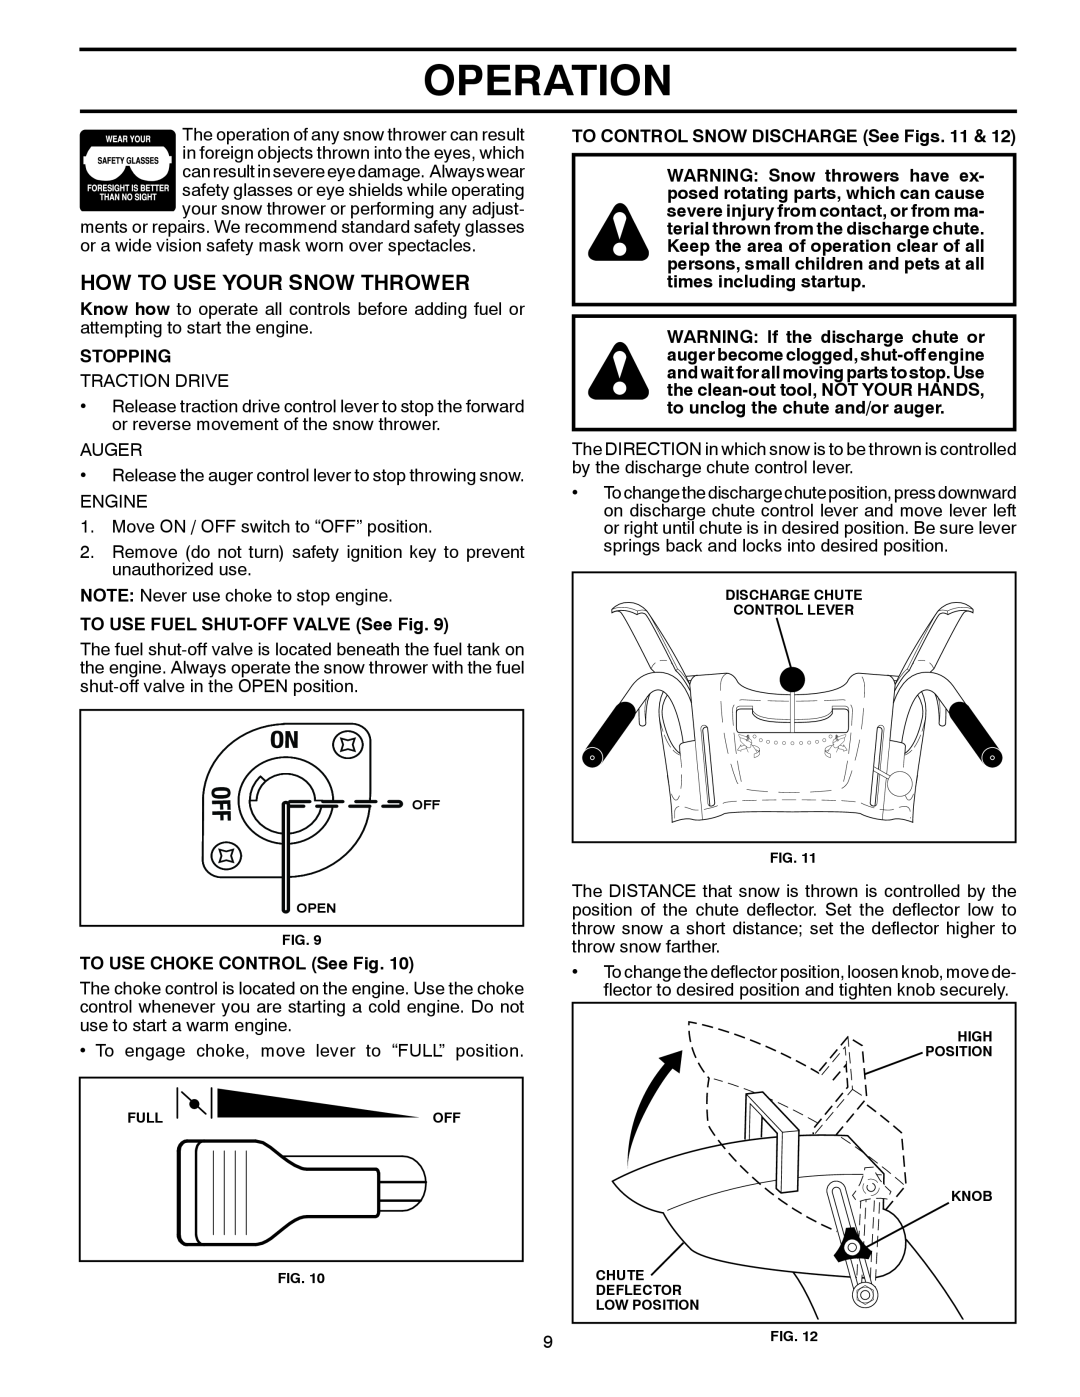 McCulloch 96192004102 owner manual How To Use Your Snow Thrower, Operation, Stopping, TO USE FUEL SHUT-OFF VALVE See Fig 